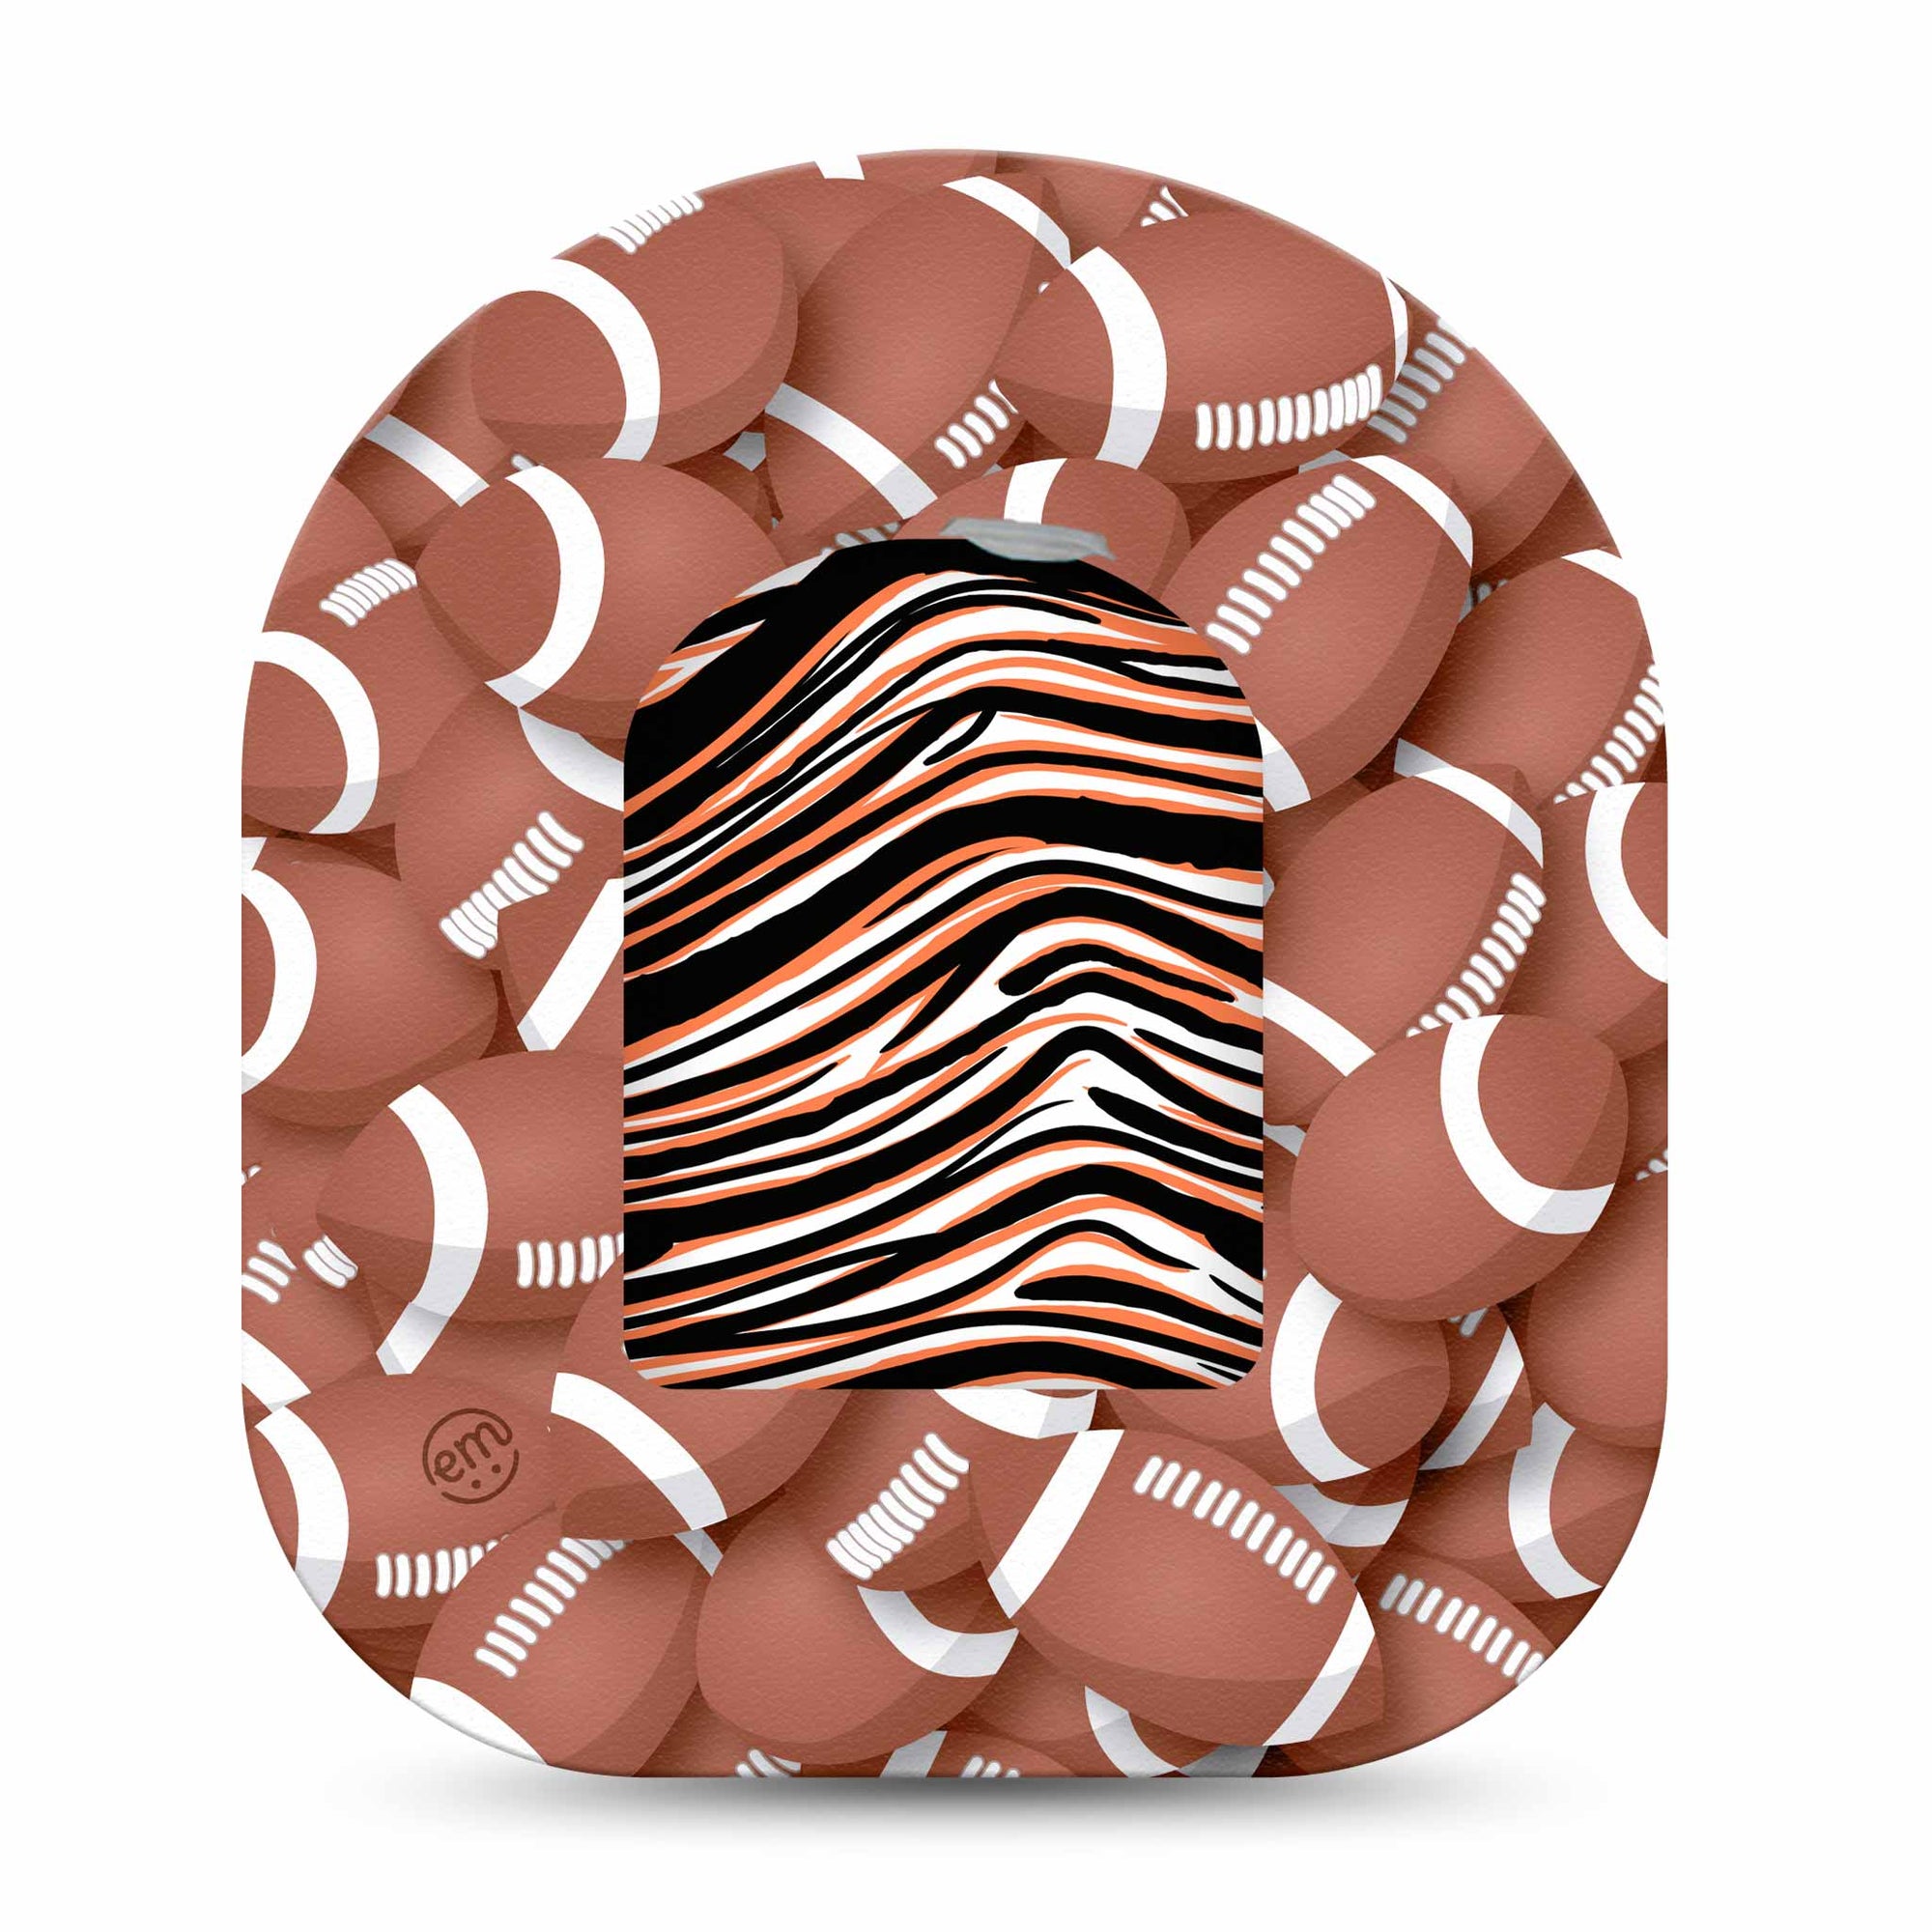 ExpressionMed Orange and Black Bengals Team Spirit Omnipod Pump Sticker and Football Adhesive